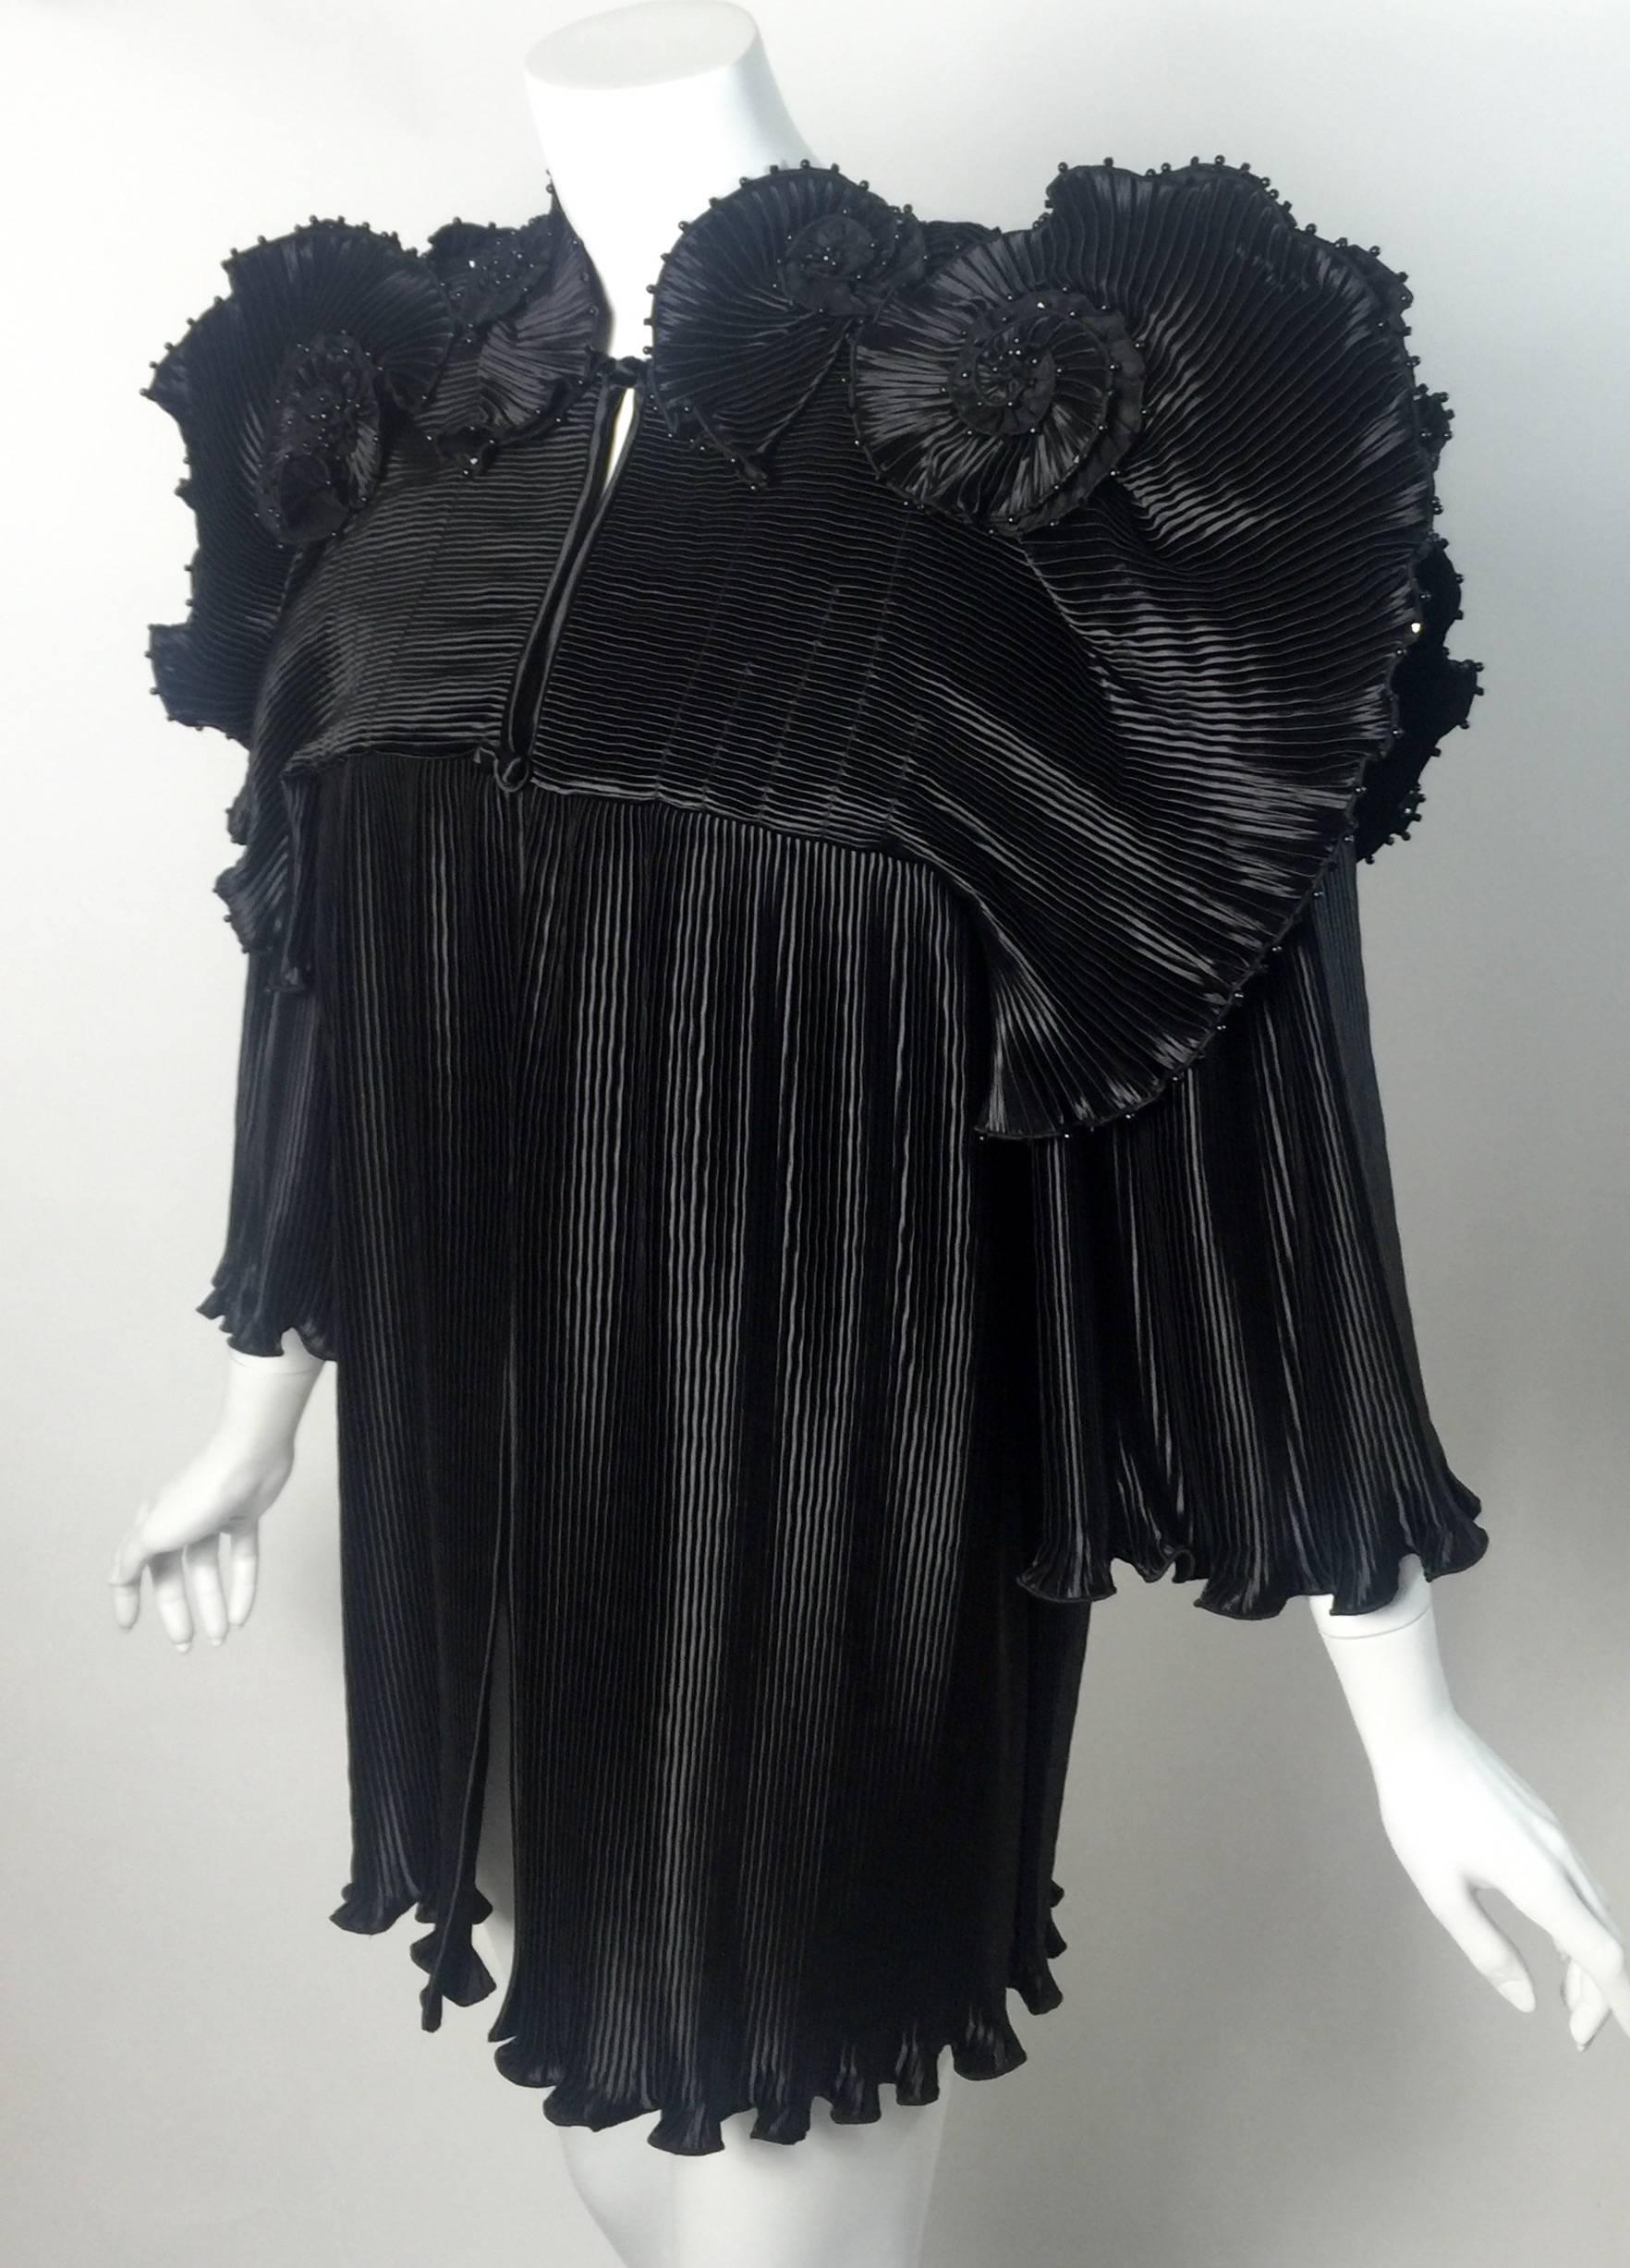 An iconic 1970s Zandra Rhodes jacket. This spectacular jacket done in all black with micro accordion pleats throughout. Beautiful fabric sculpted flowers along the top near the shoulders and  dramatic fanned ruffles along the shoulder line. finished